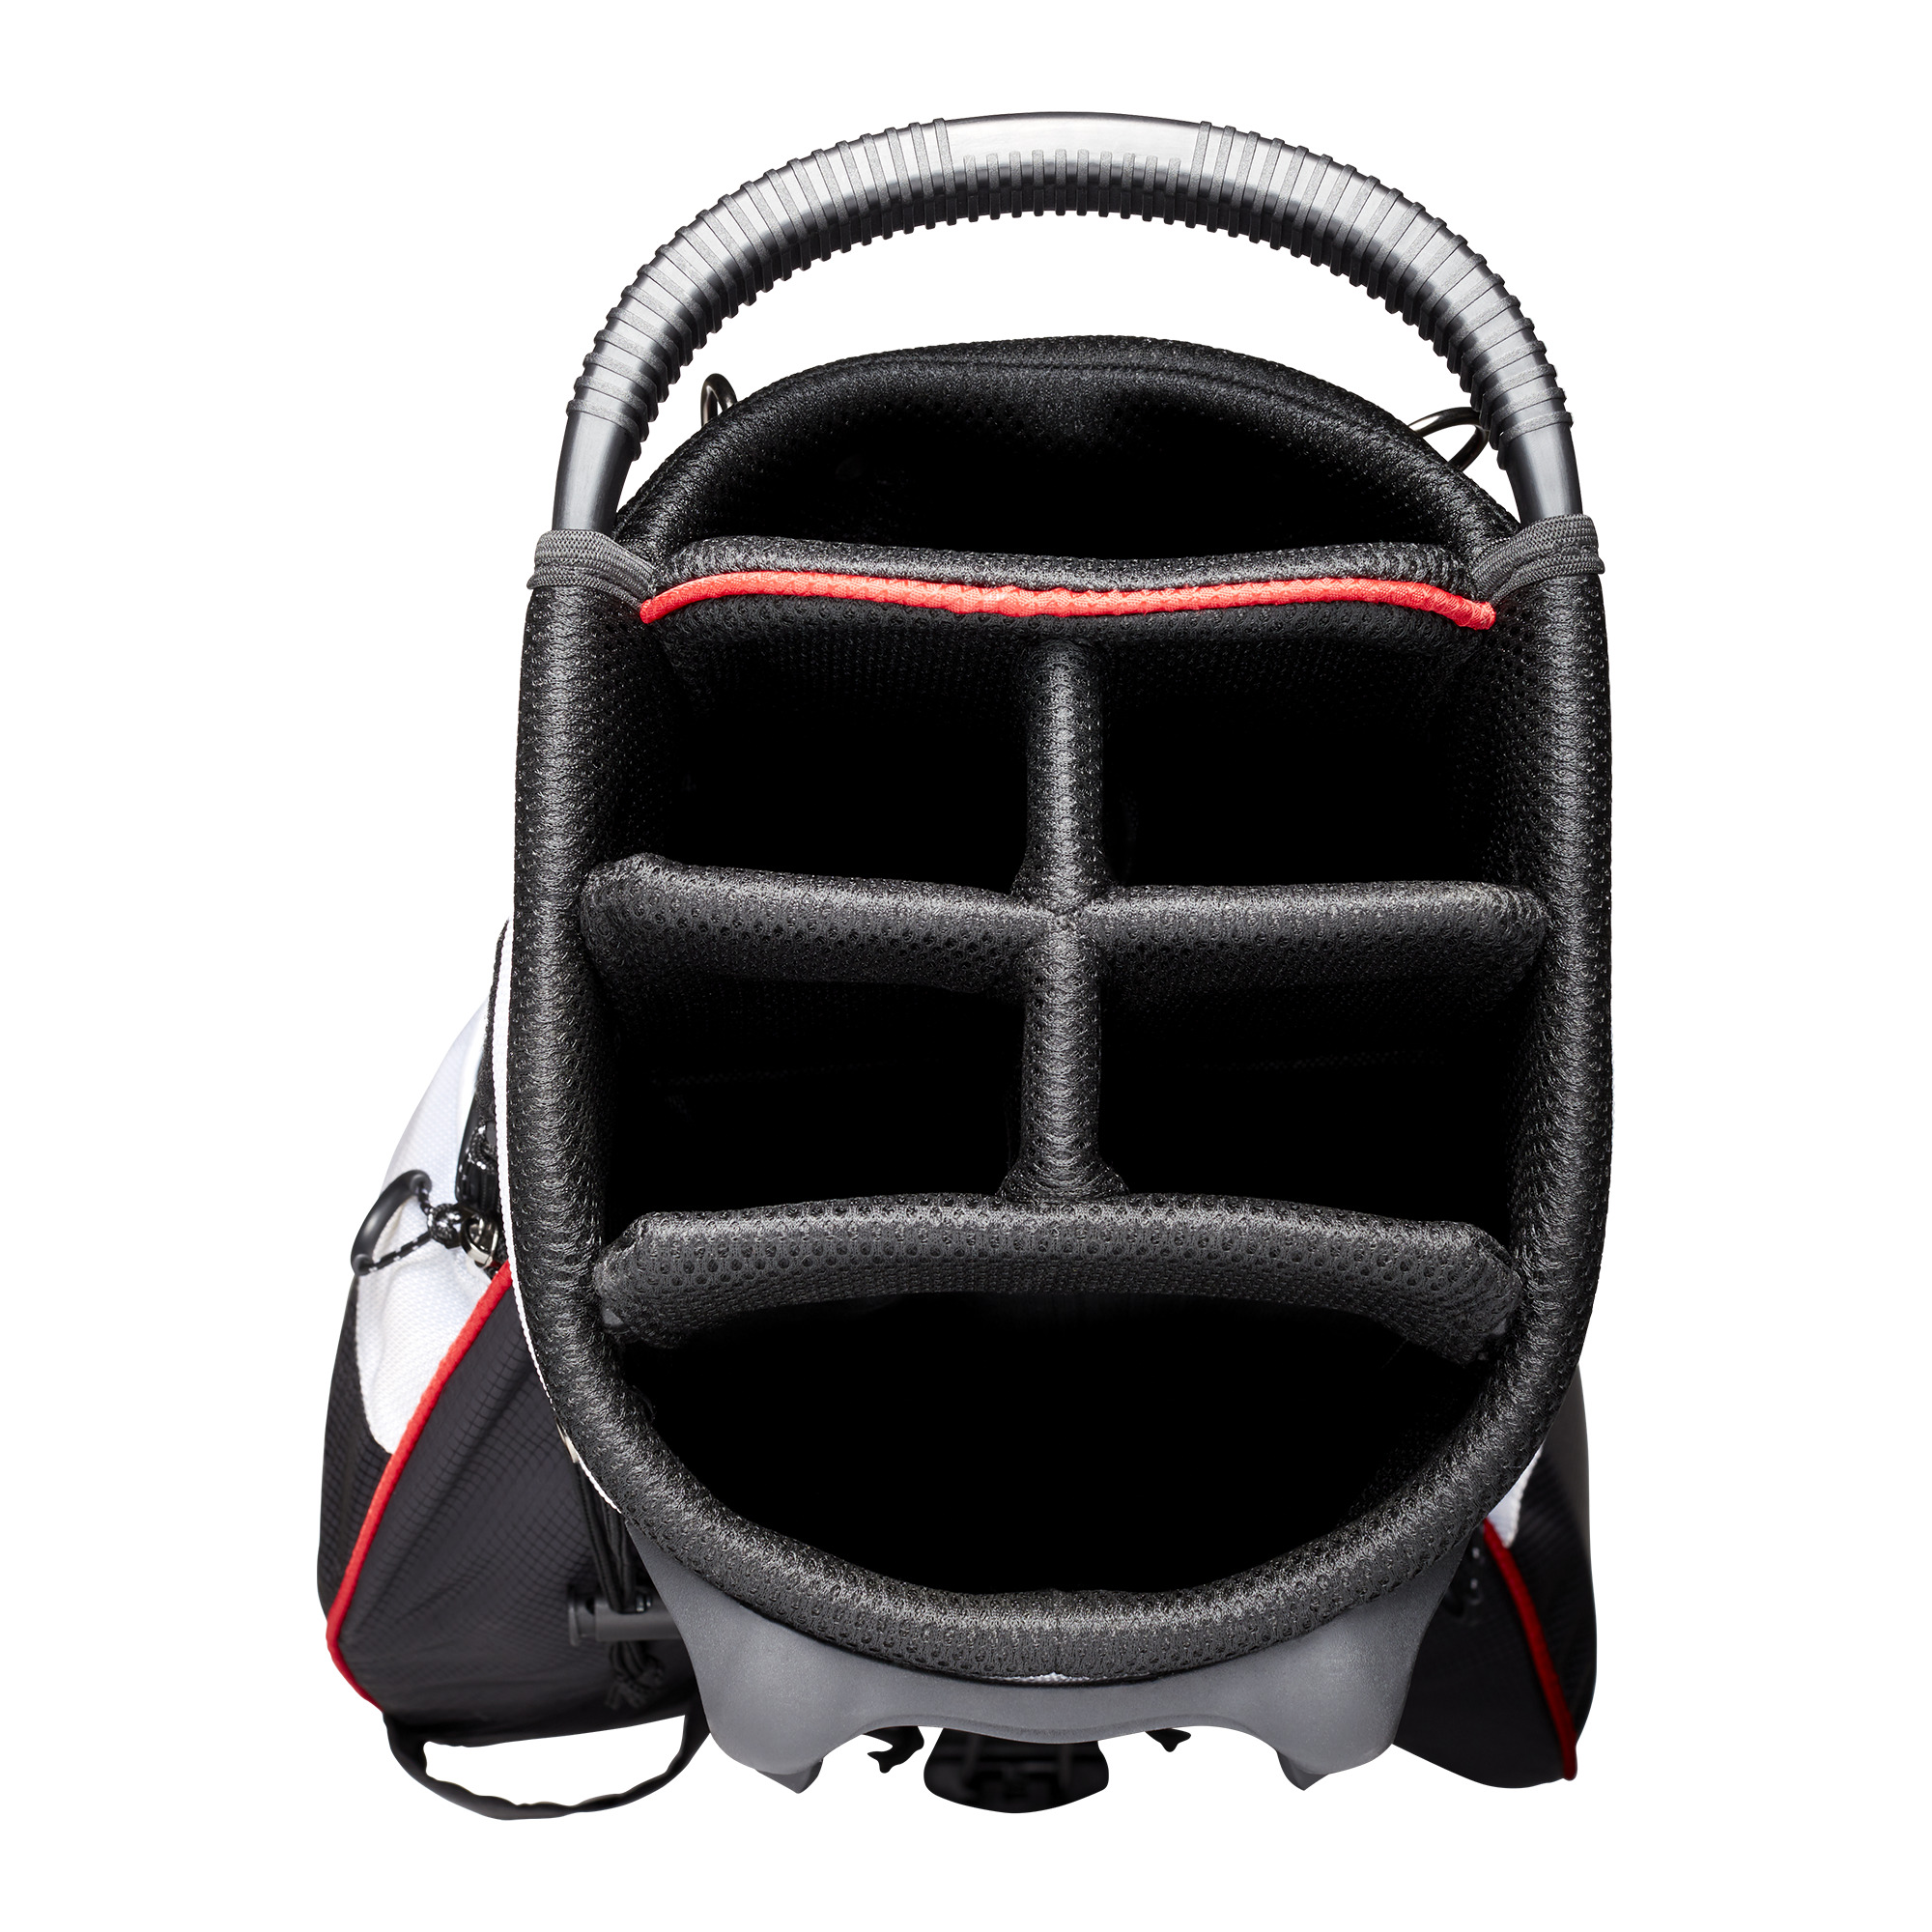 Wilson Stand Golf Bag, 6 Way Divider, Black/White/Red - image 4 of 6